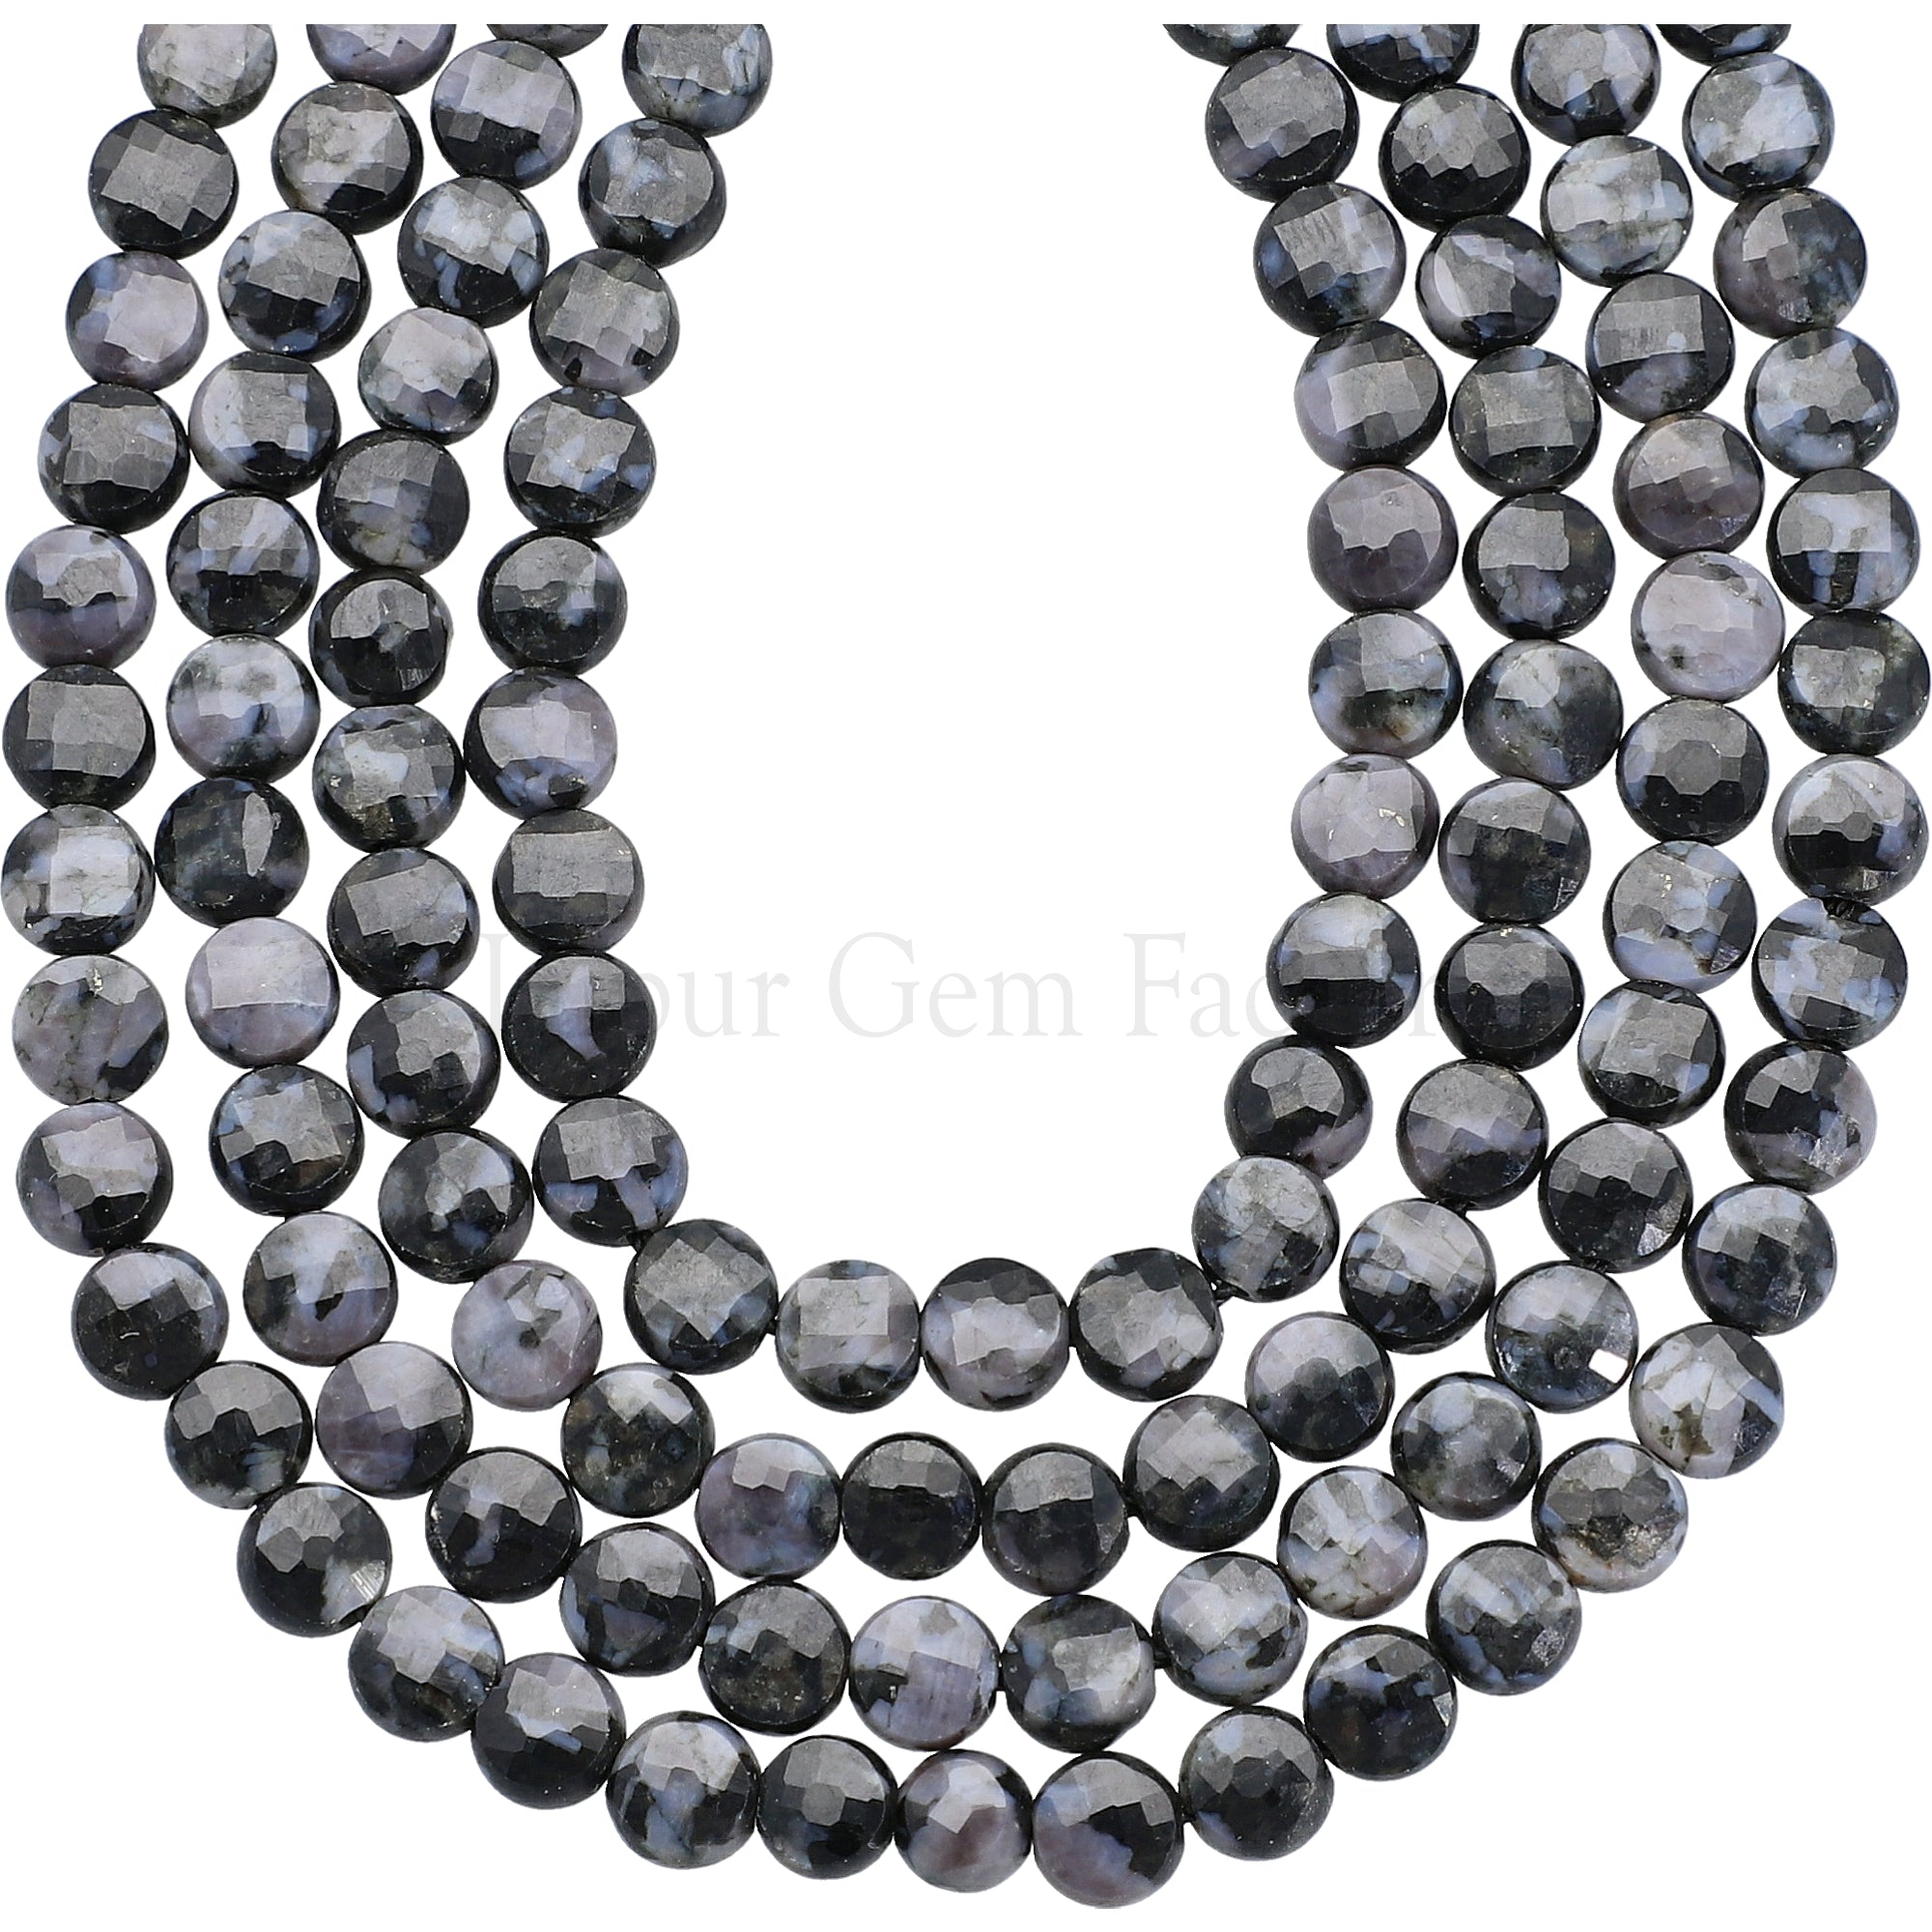 6 MM Indigo Gabbro Agate Faceted Coin Beads 15 Inches Strand